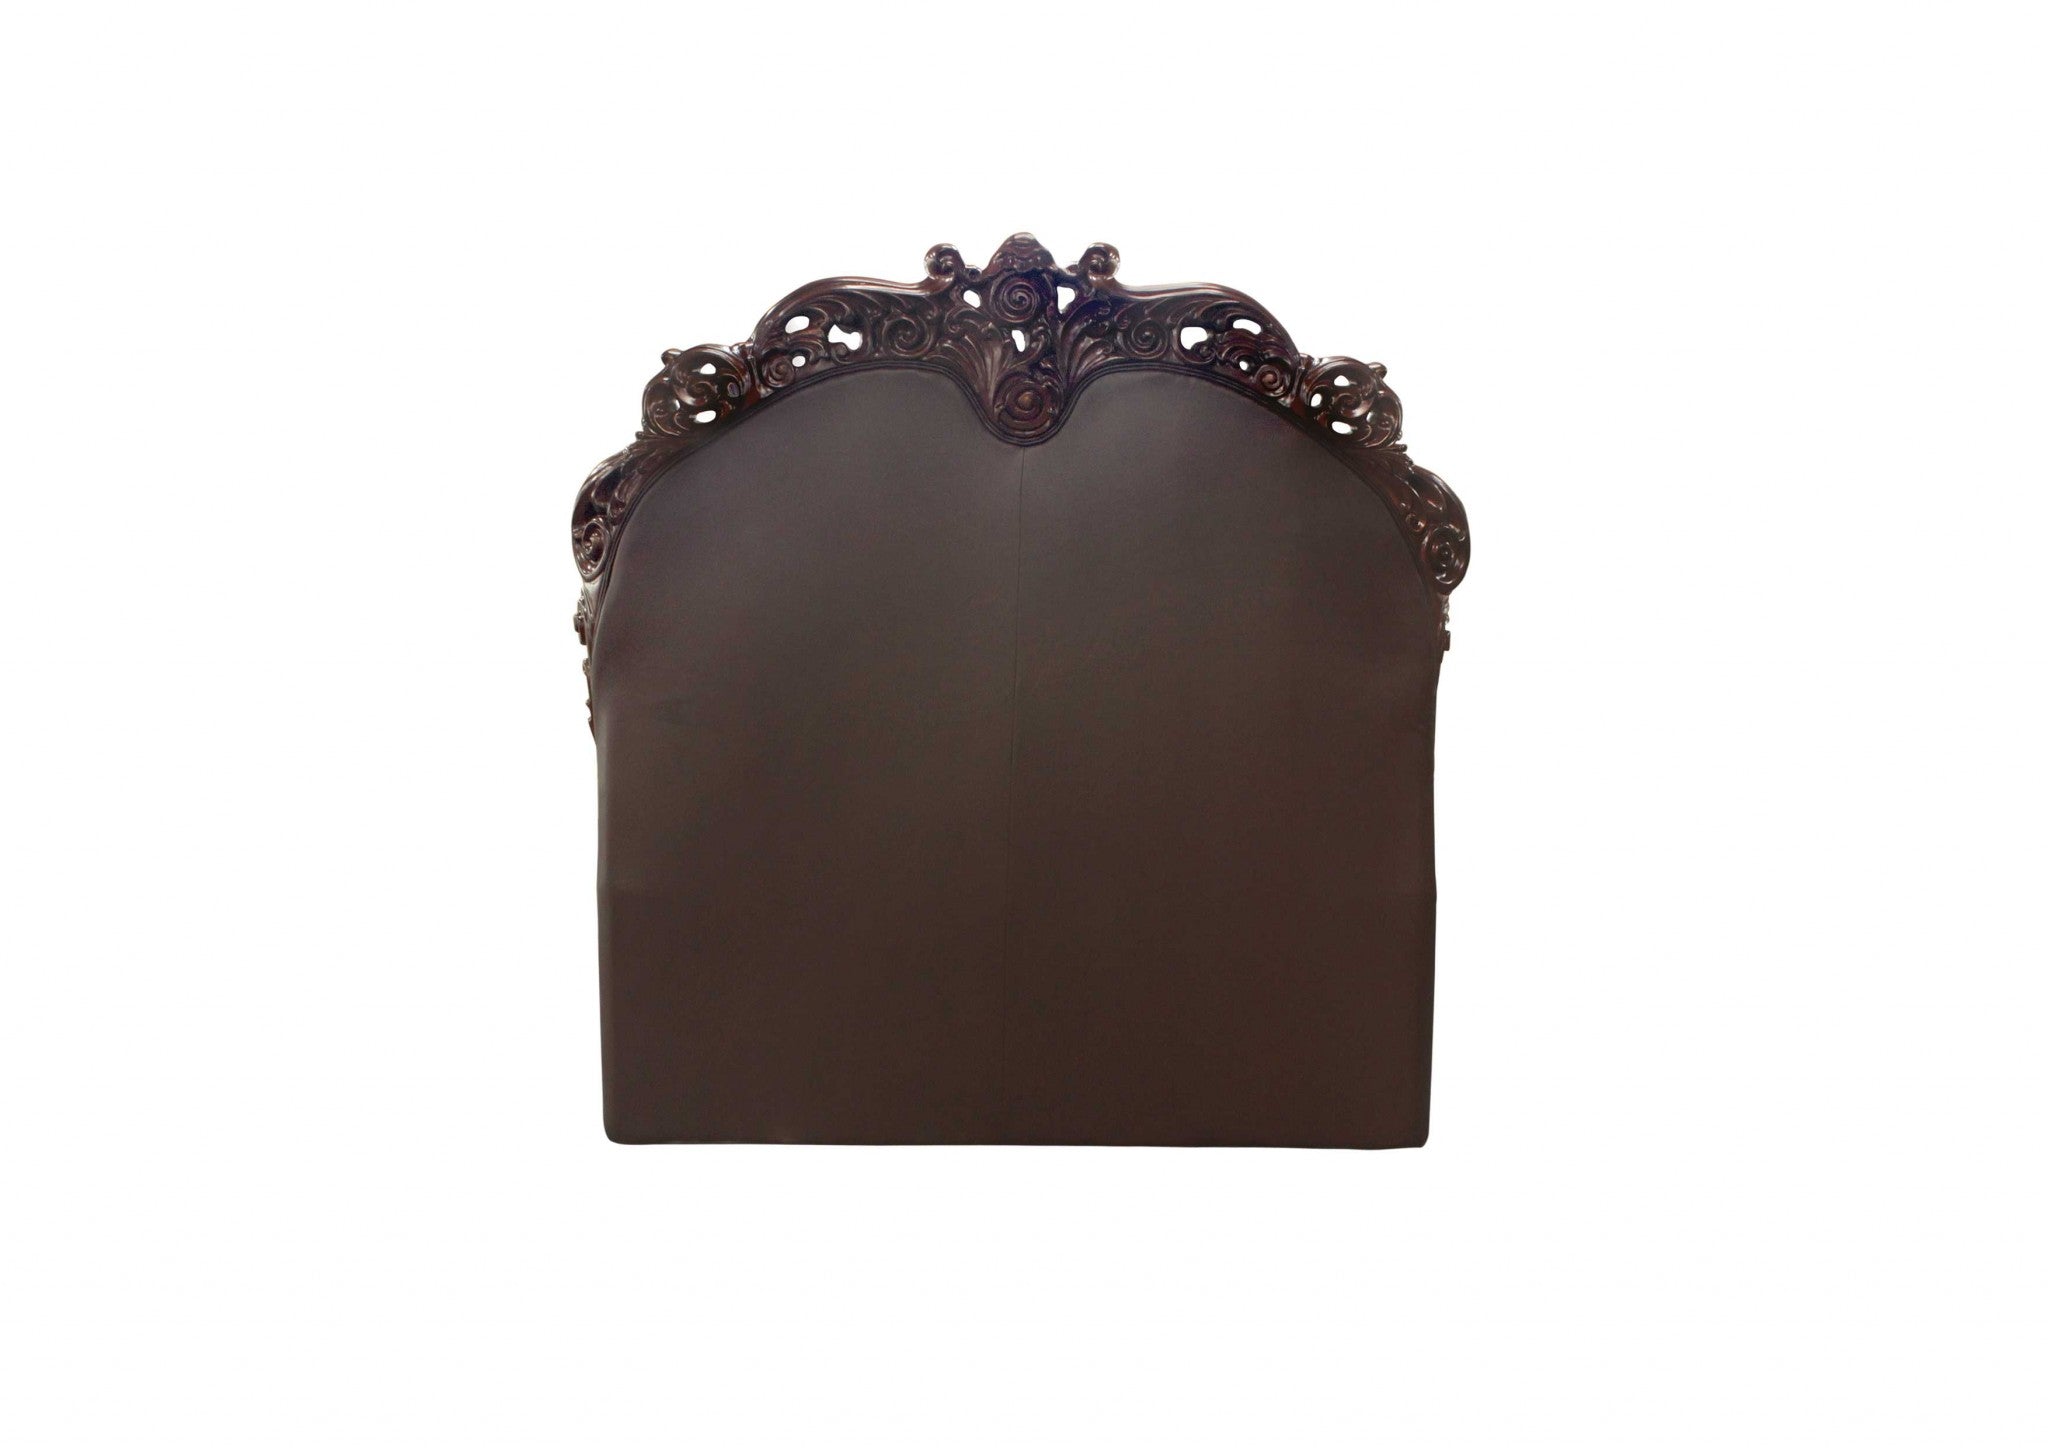 Queen Size Elaborately Carved Cherry Wood Finish Bed with Tufted Dark Faux Leather Headboard